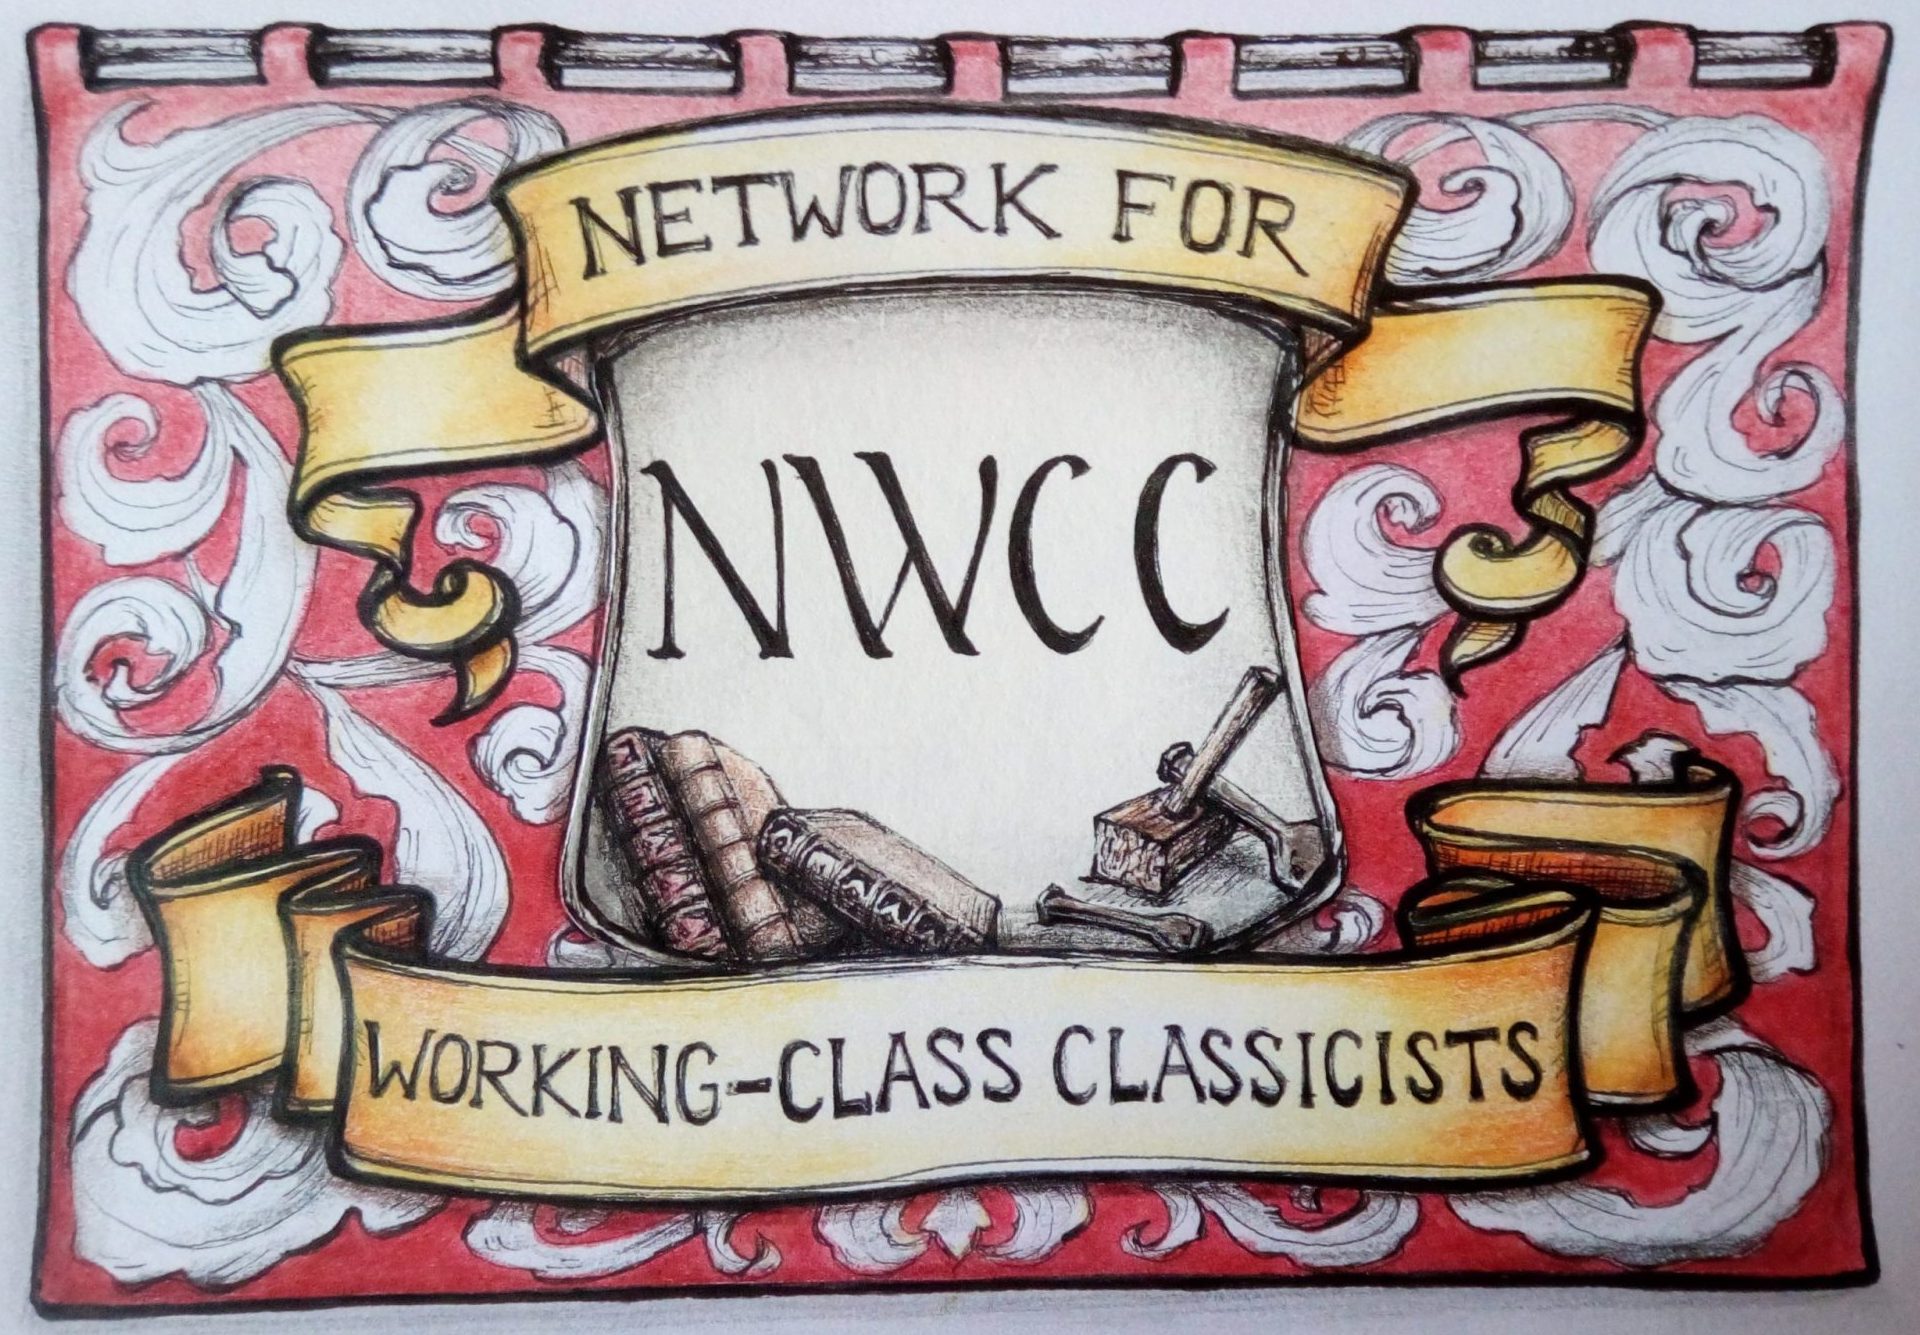 Banner of the Network for Working-Class Classicists